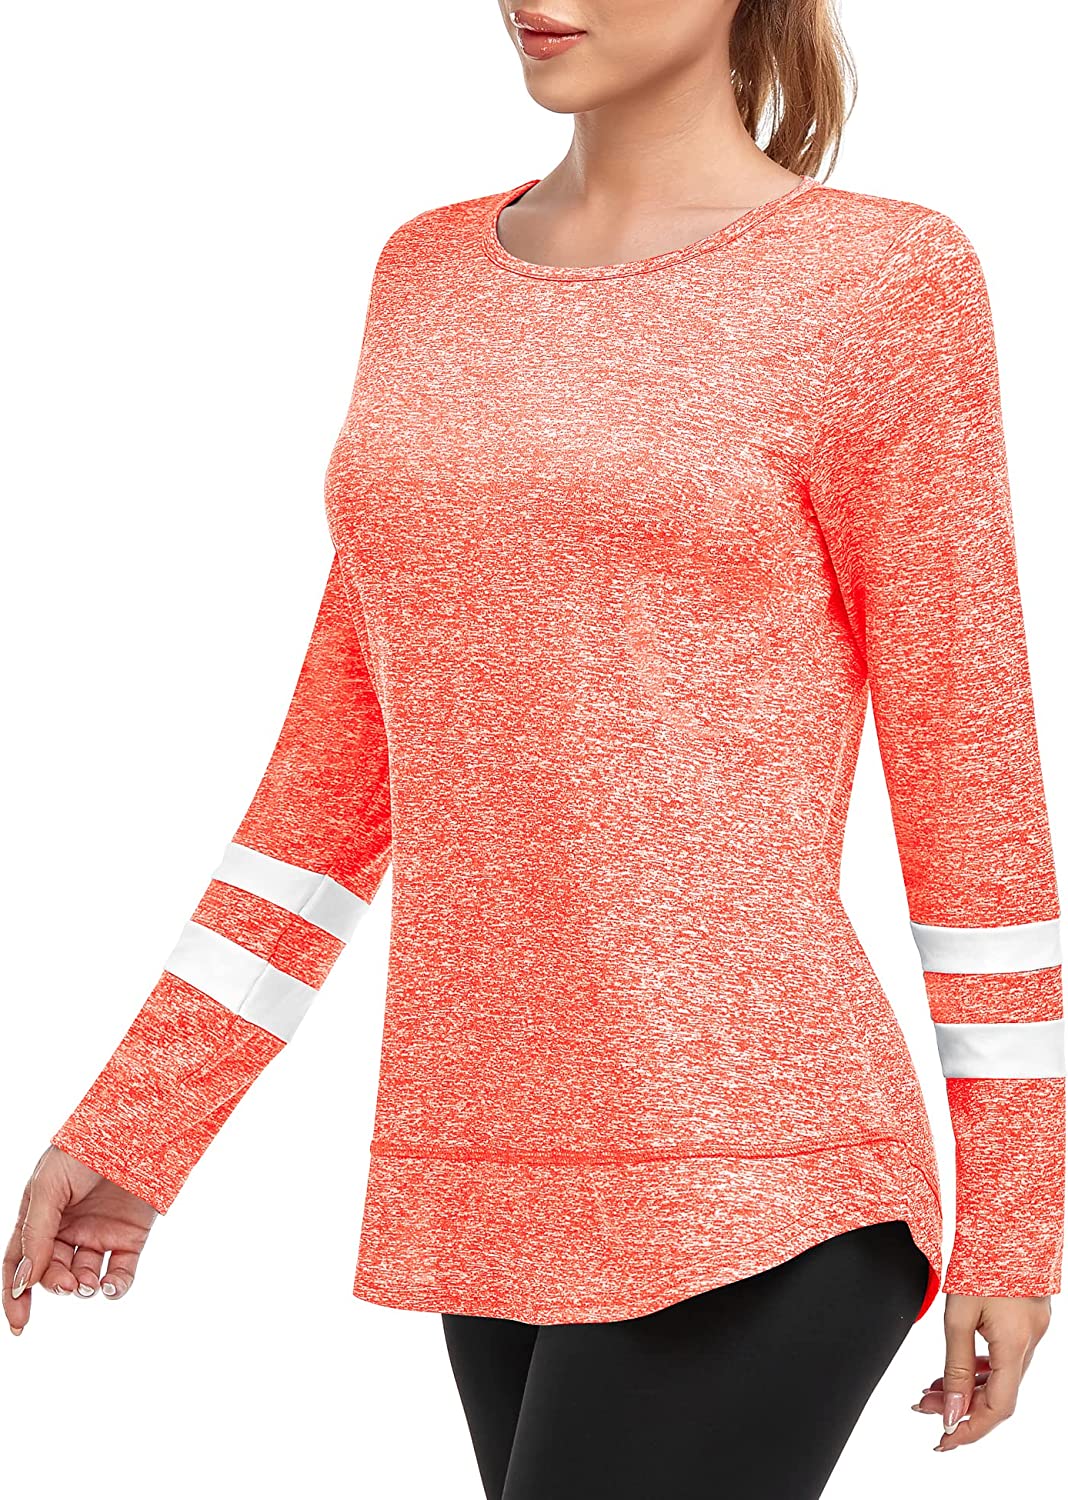 Women's Long Sleeve Workout Shirts Stripe Crew Neck Dry Fit Tops Sports -  WF Shopping